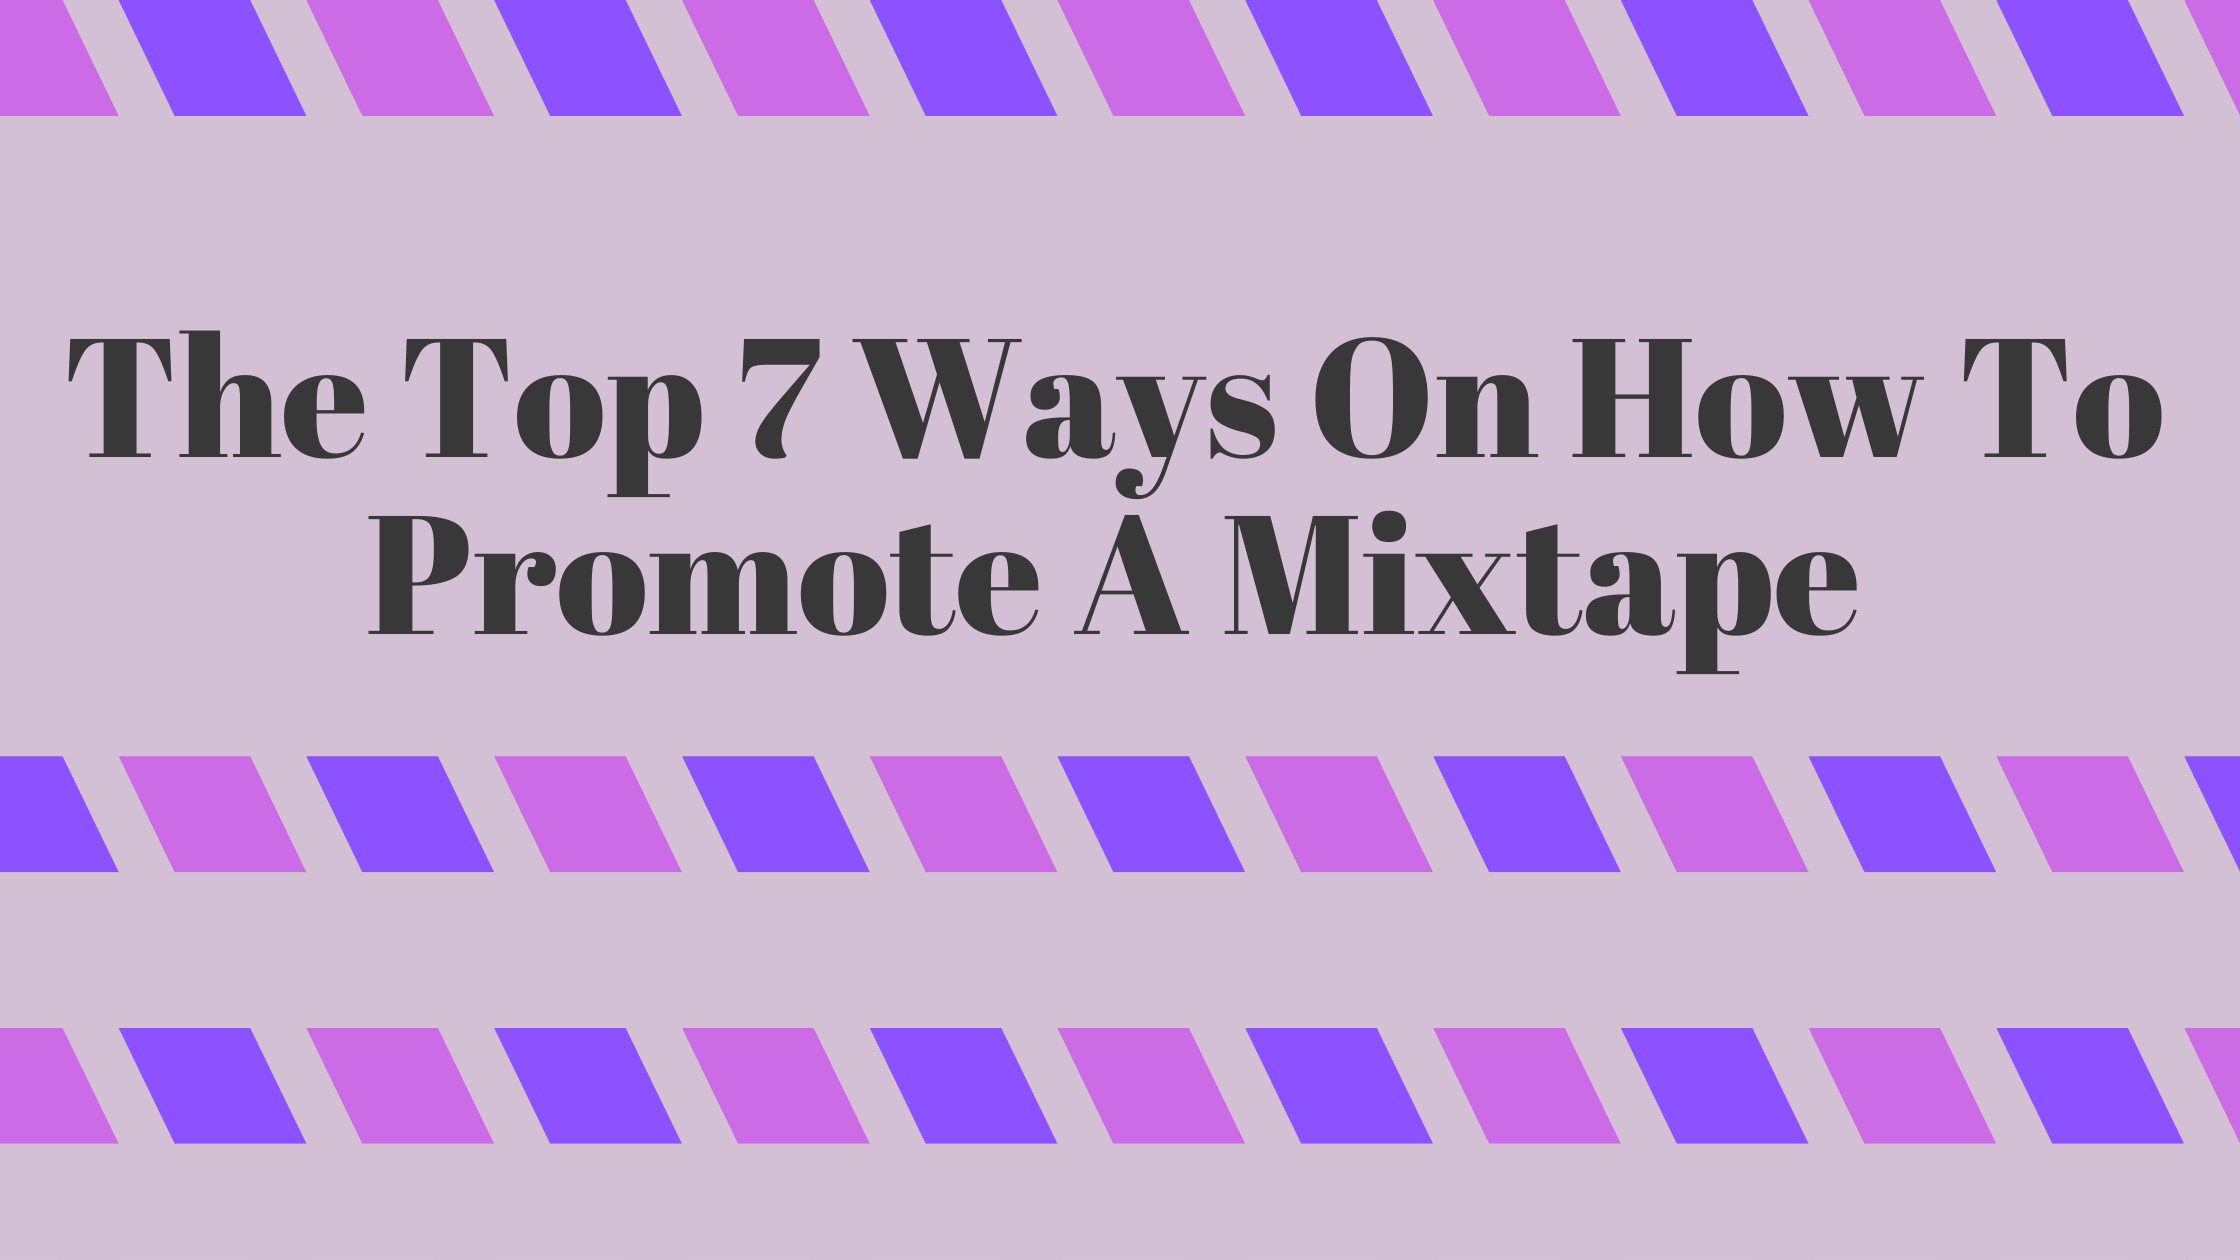 The Top 7 Ways On How To Promote A Mixtape